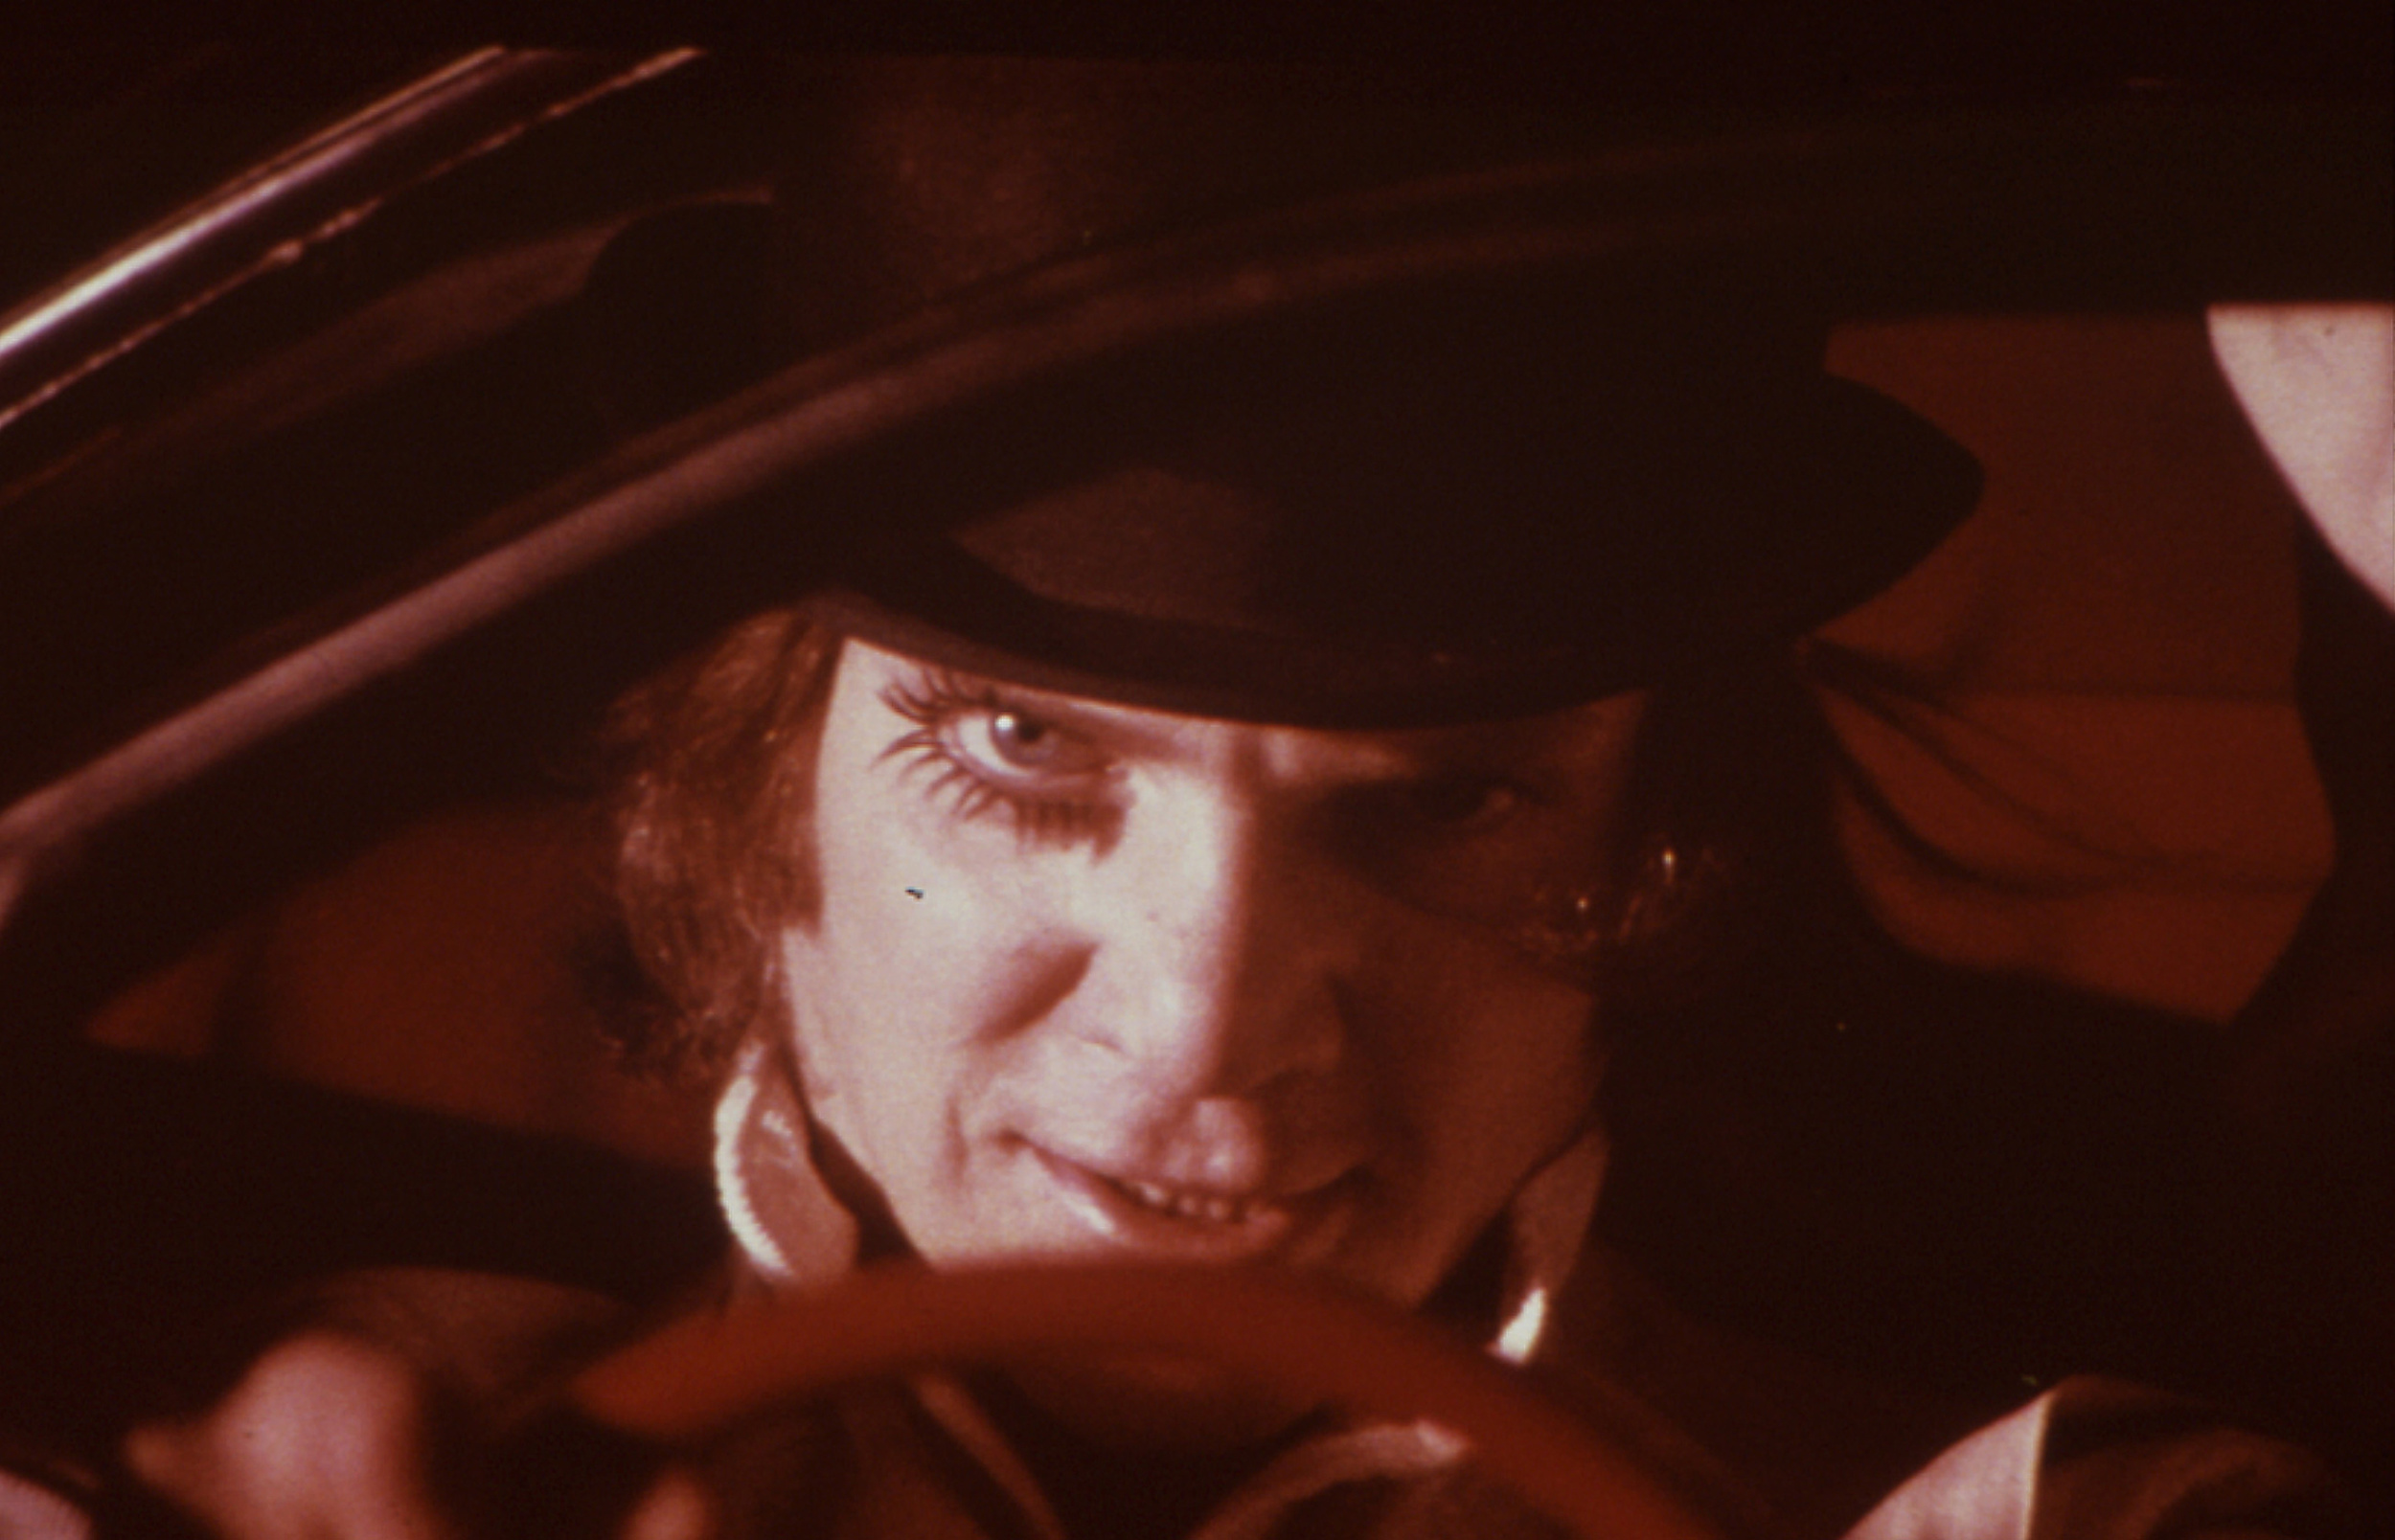 20 facts you might not know about 'A Clockwork Orange'